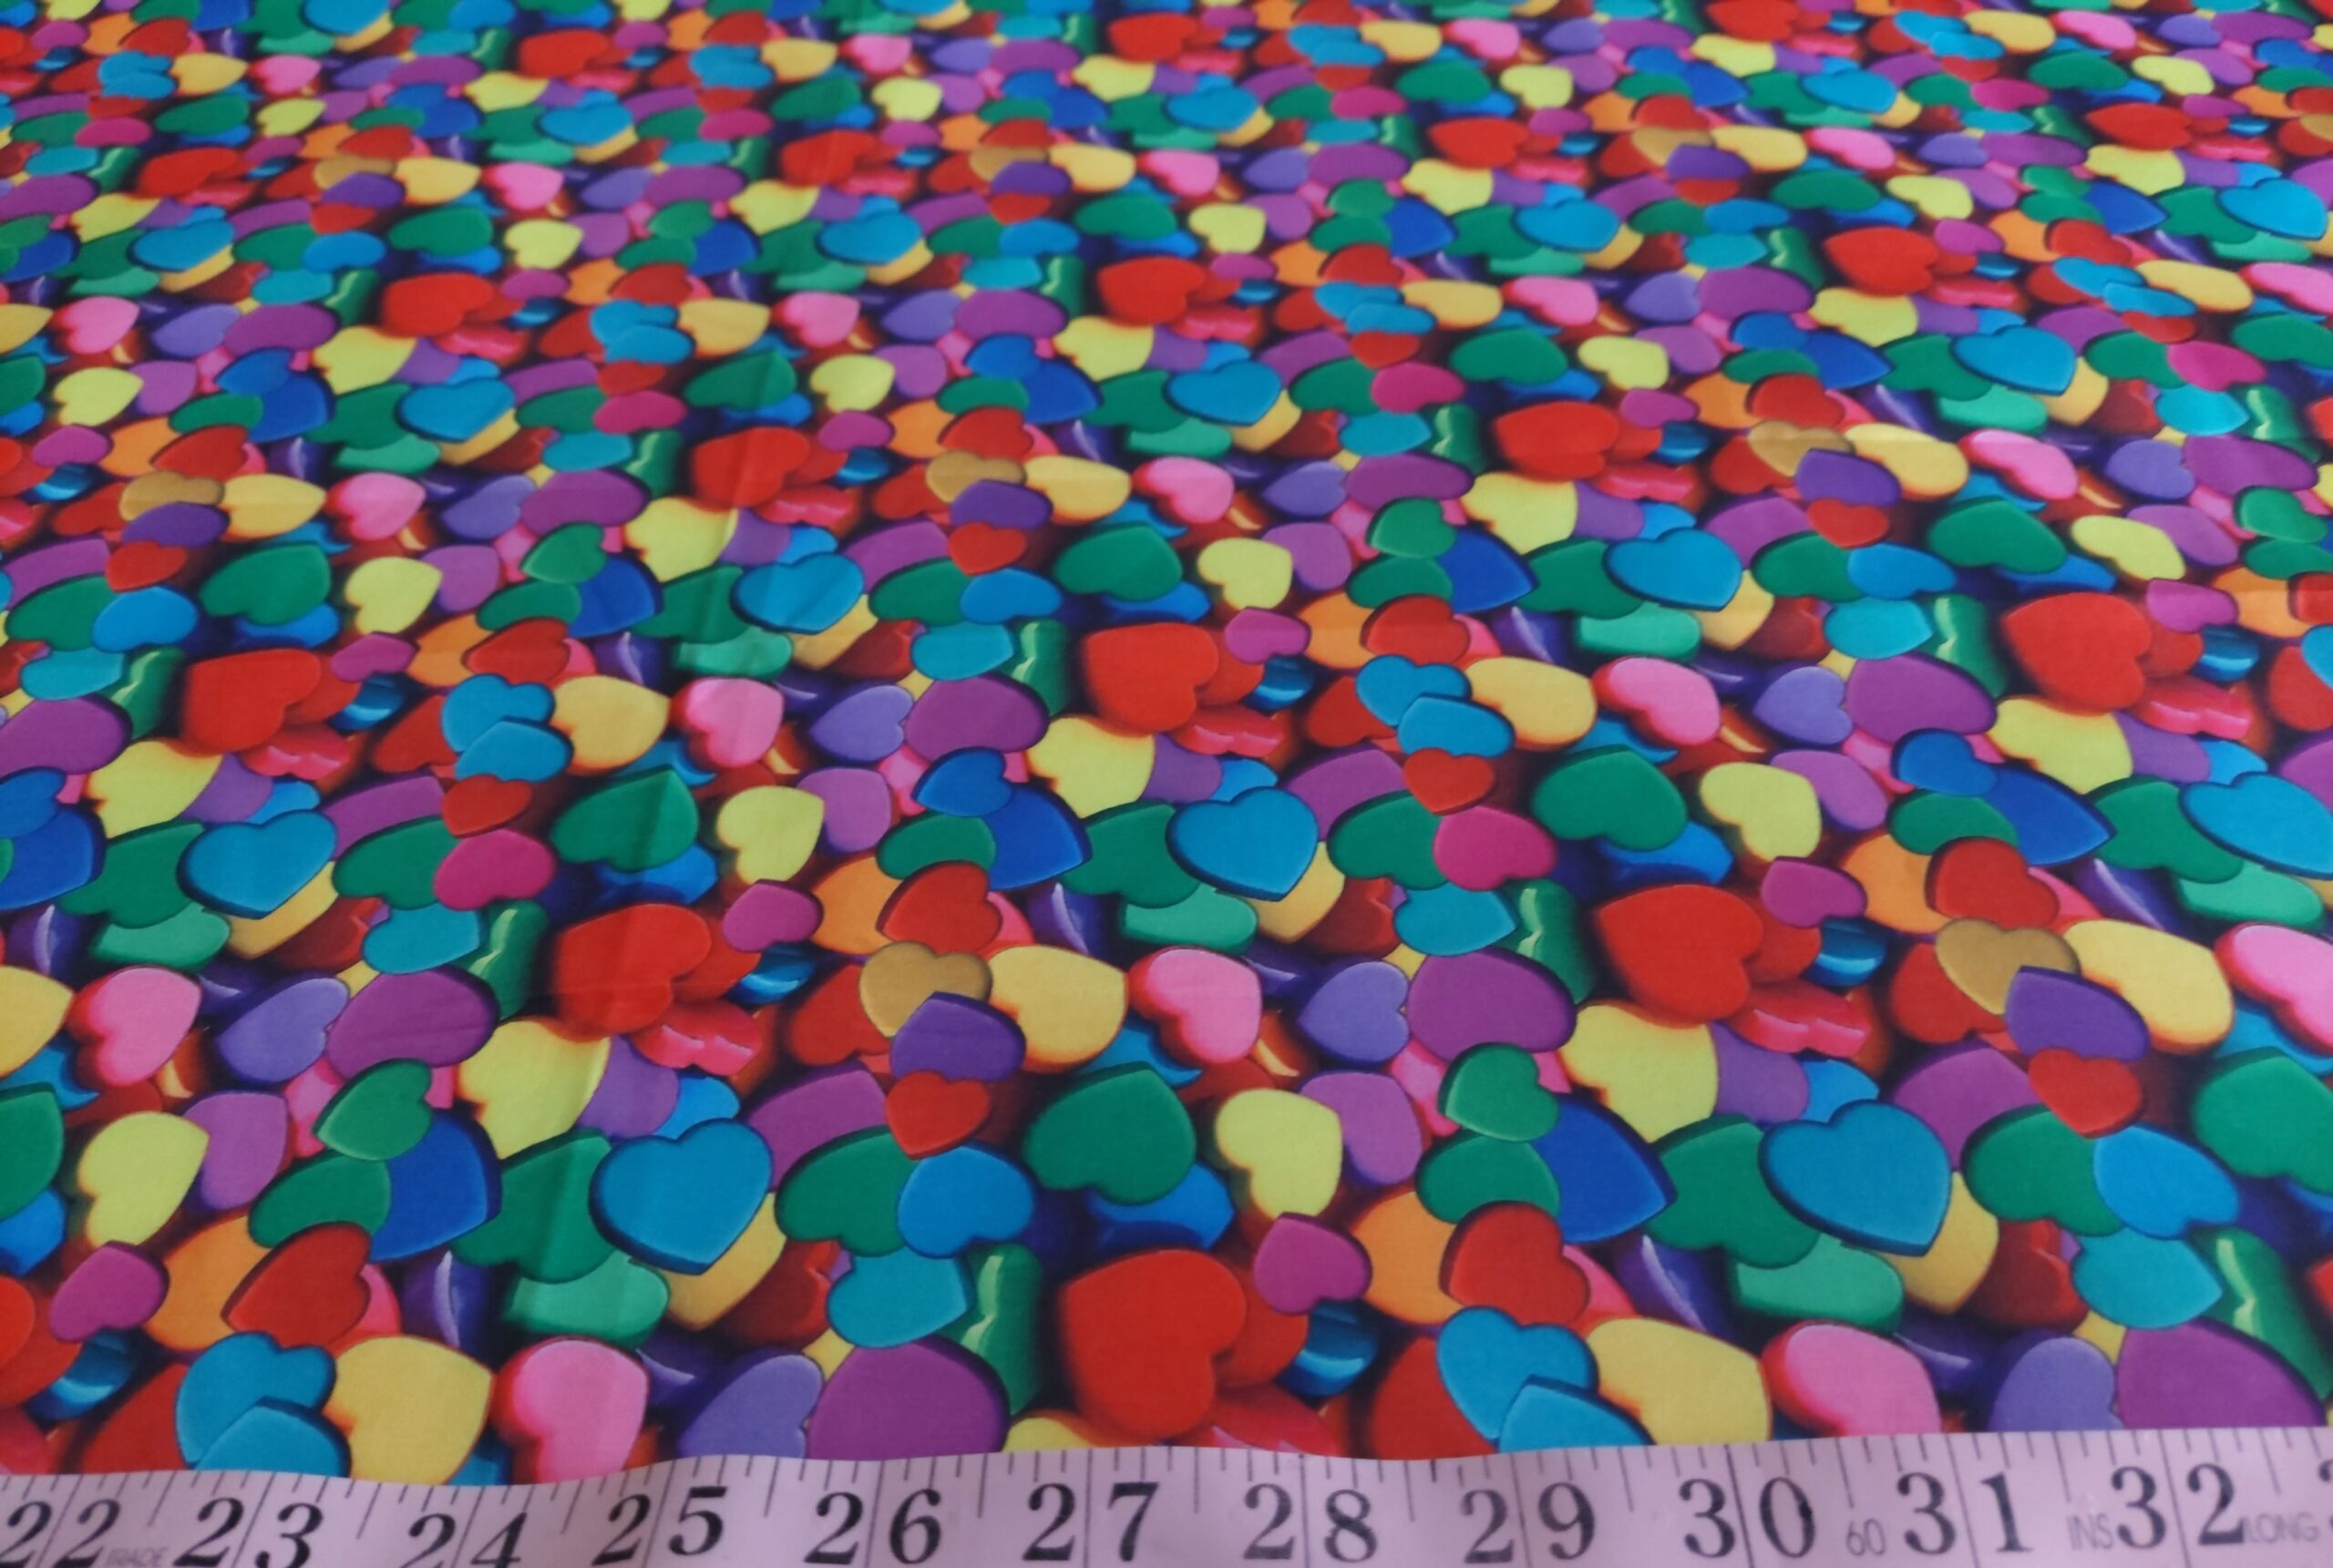 Hearts theme or love theme printed fabric with hearts printed in various colors.